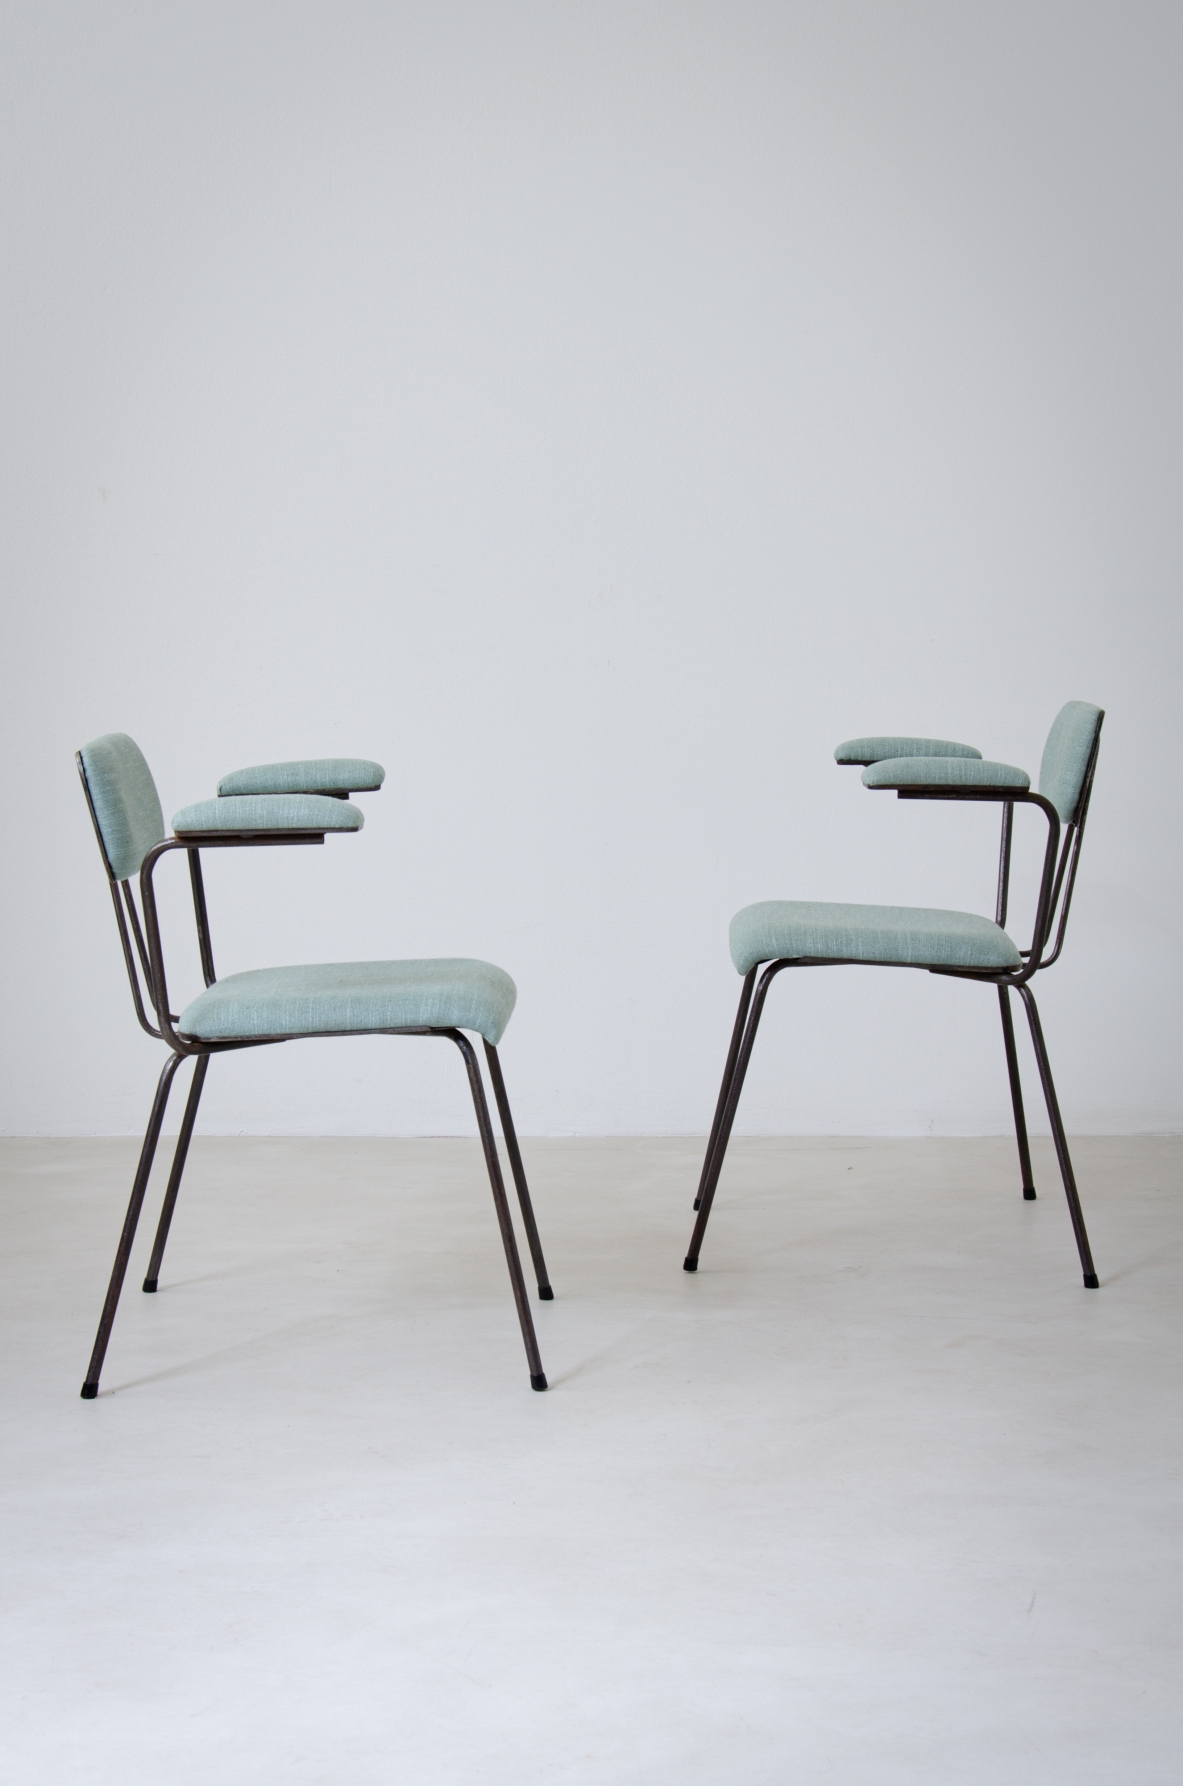 Studio BBPR, Banfi, Belgioioso, Peressutti, Rogers   Pair of chairs with armrests